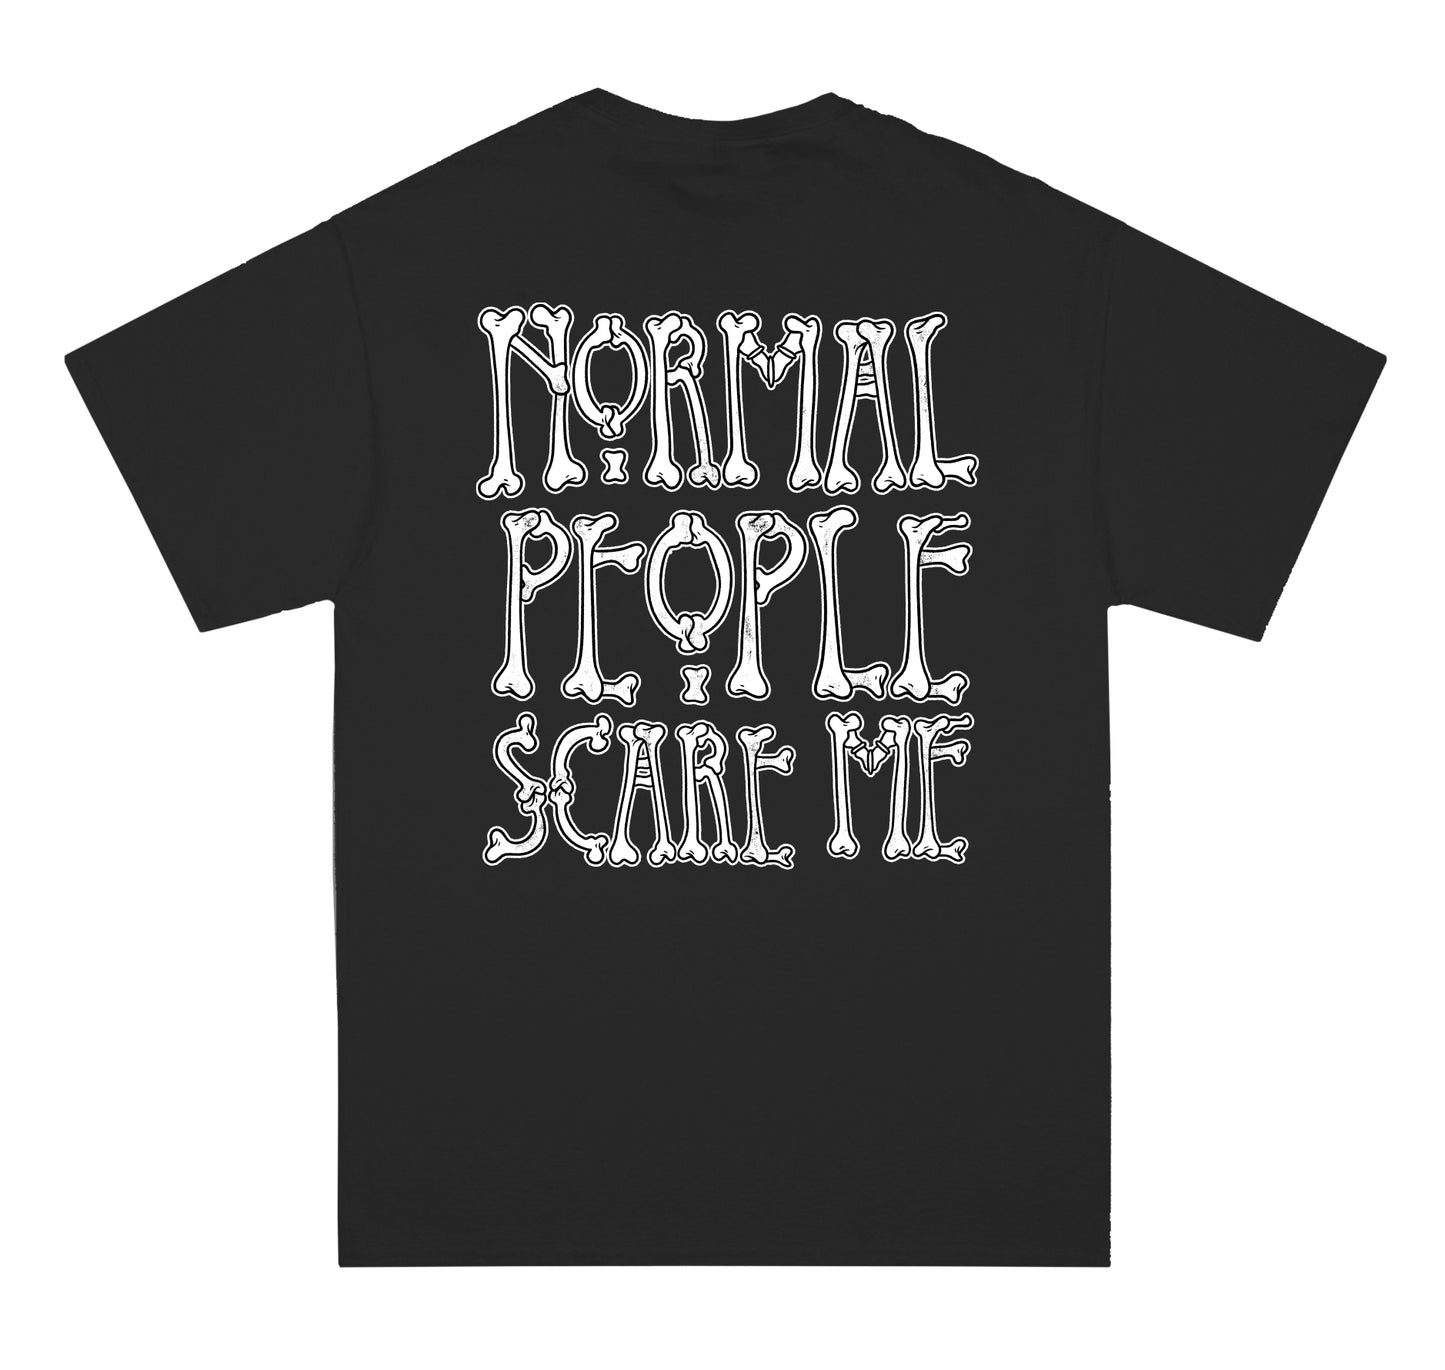 Normal People Scare Me T-Shirt